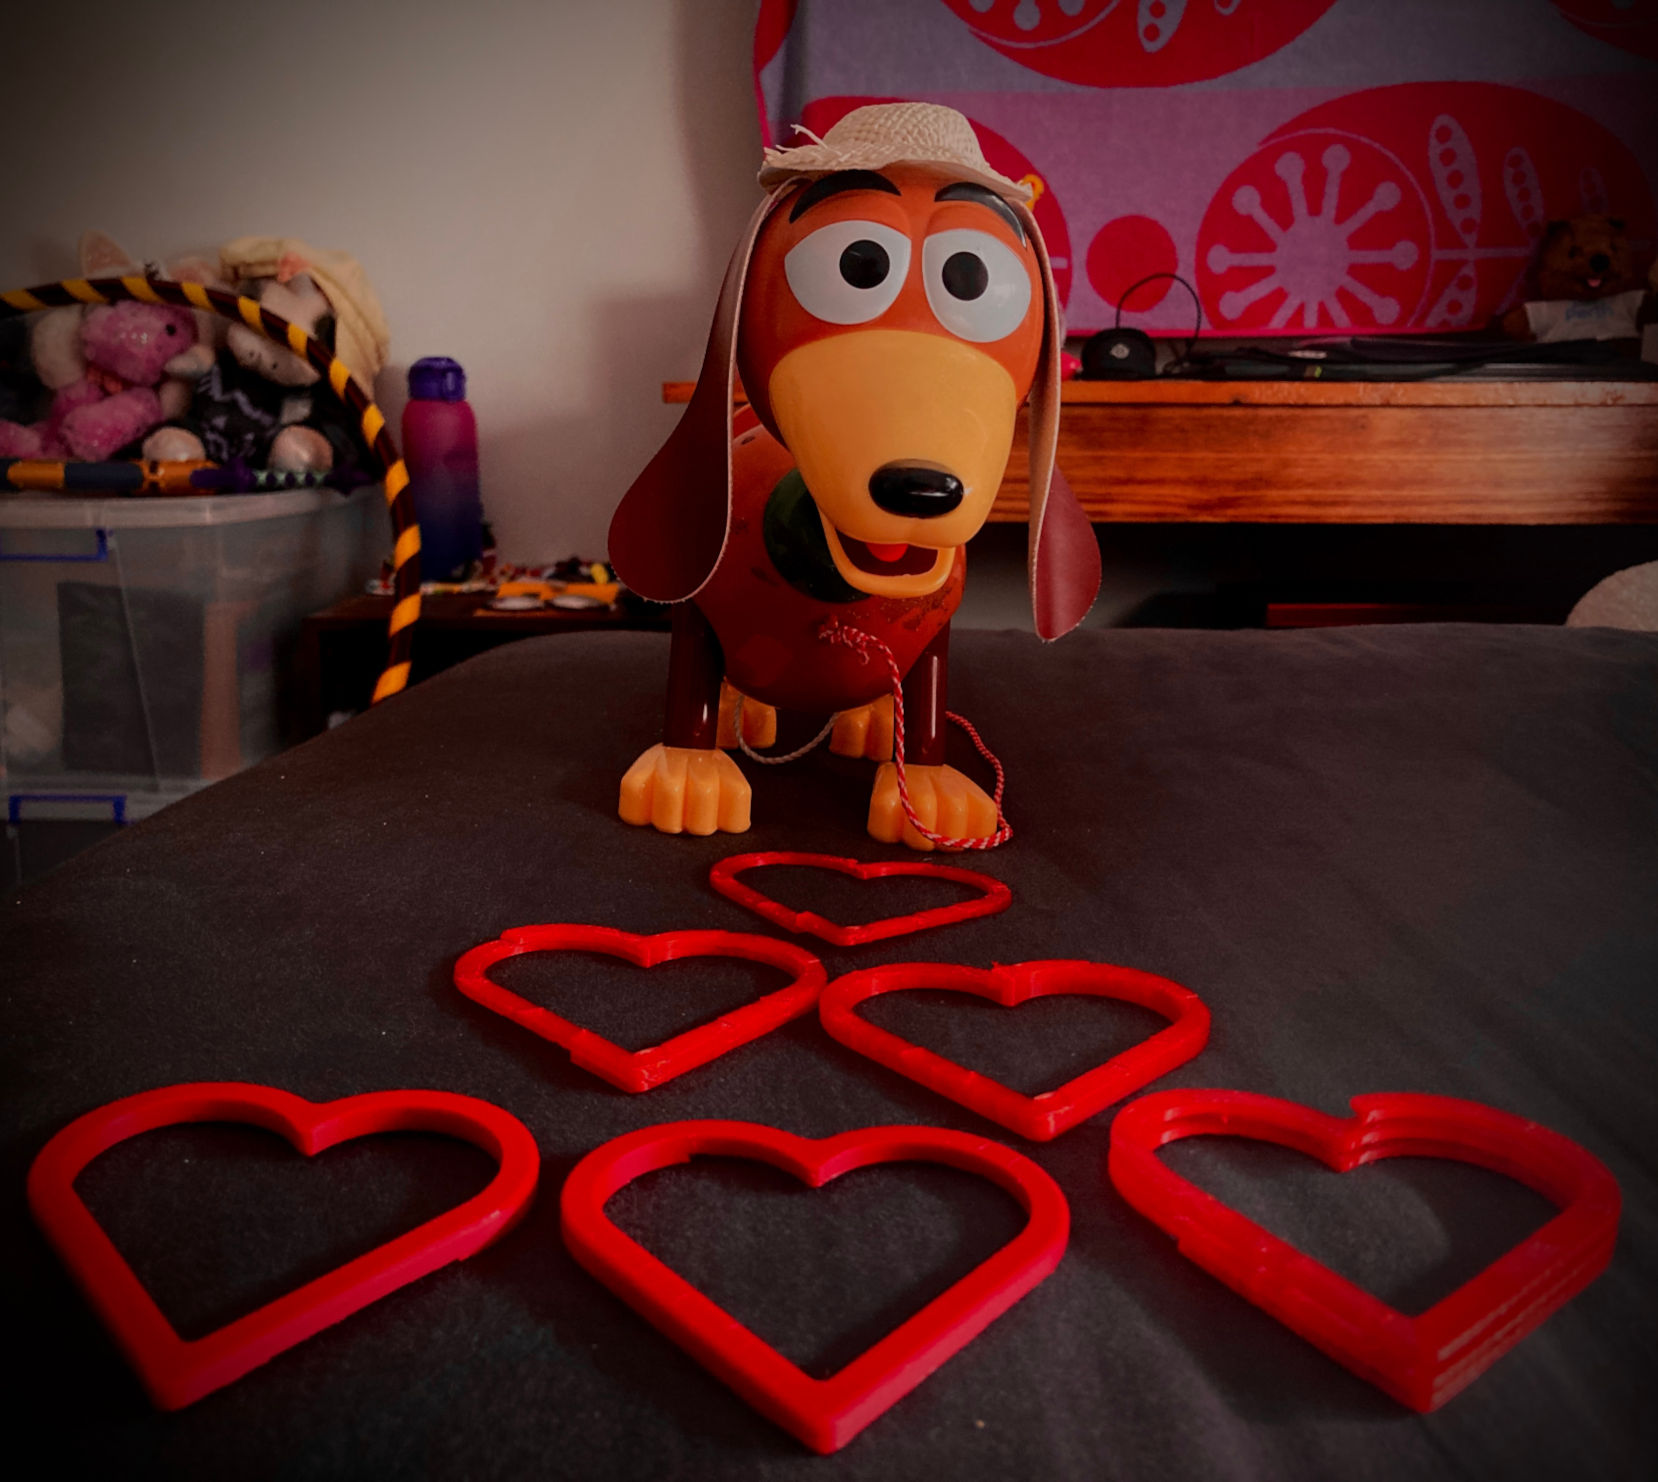 Slinky Dog positioned on bed with six red hollow love hearts.